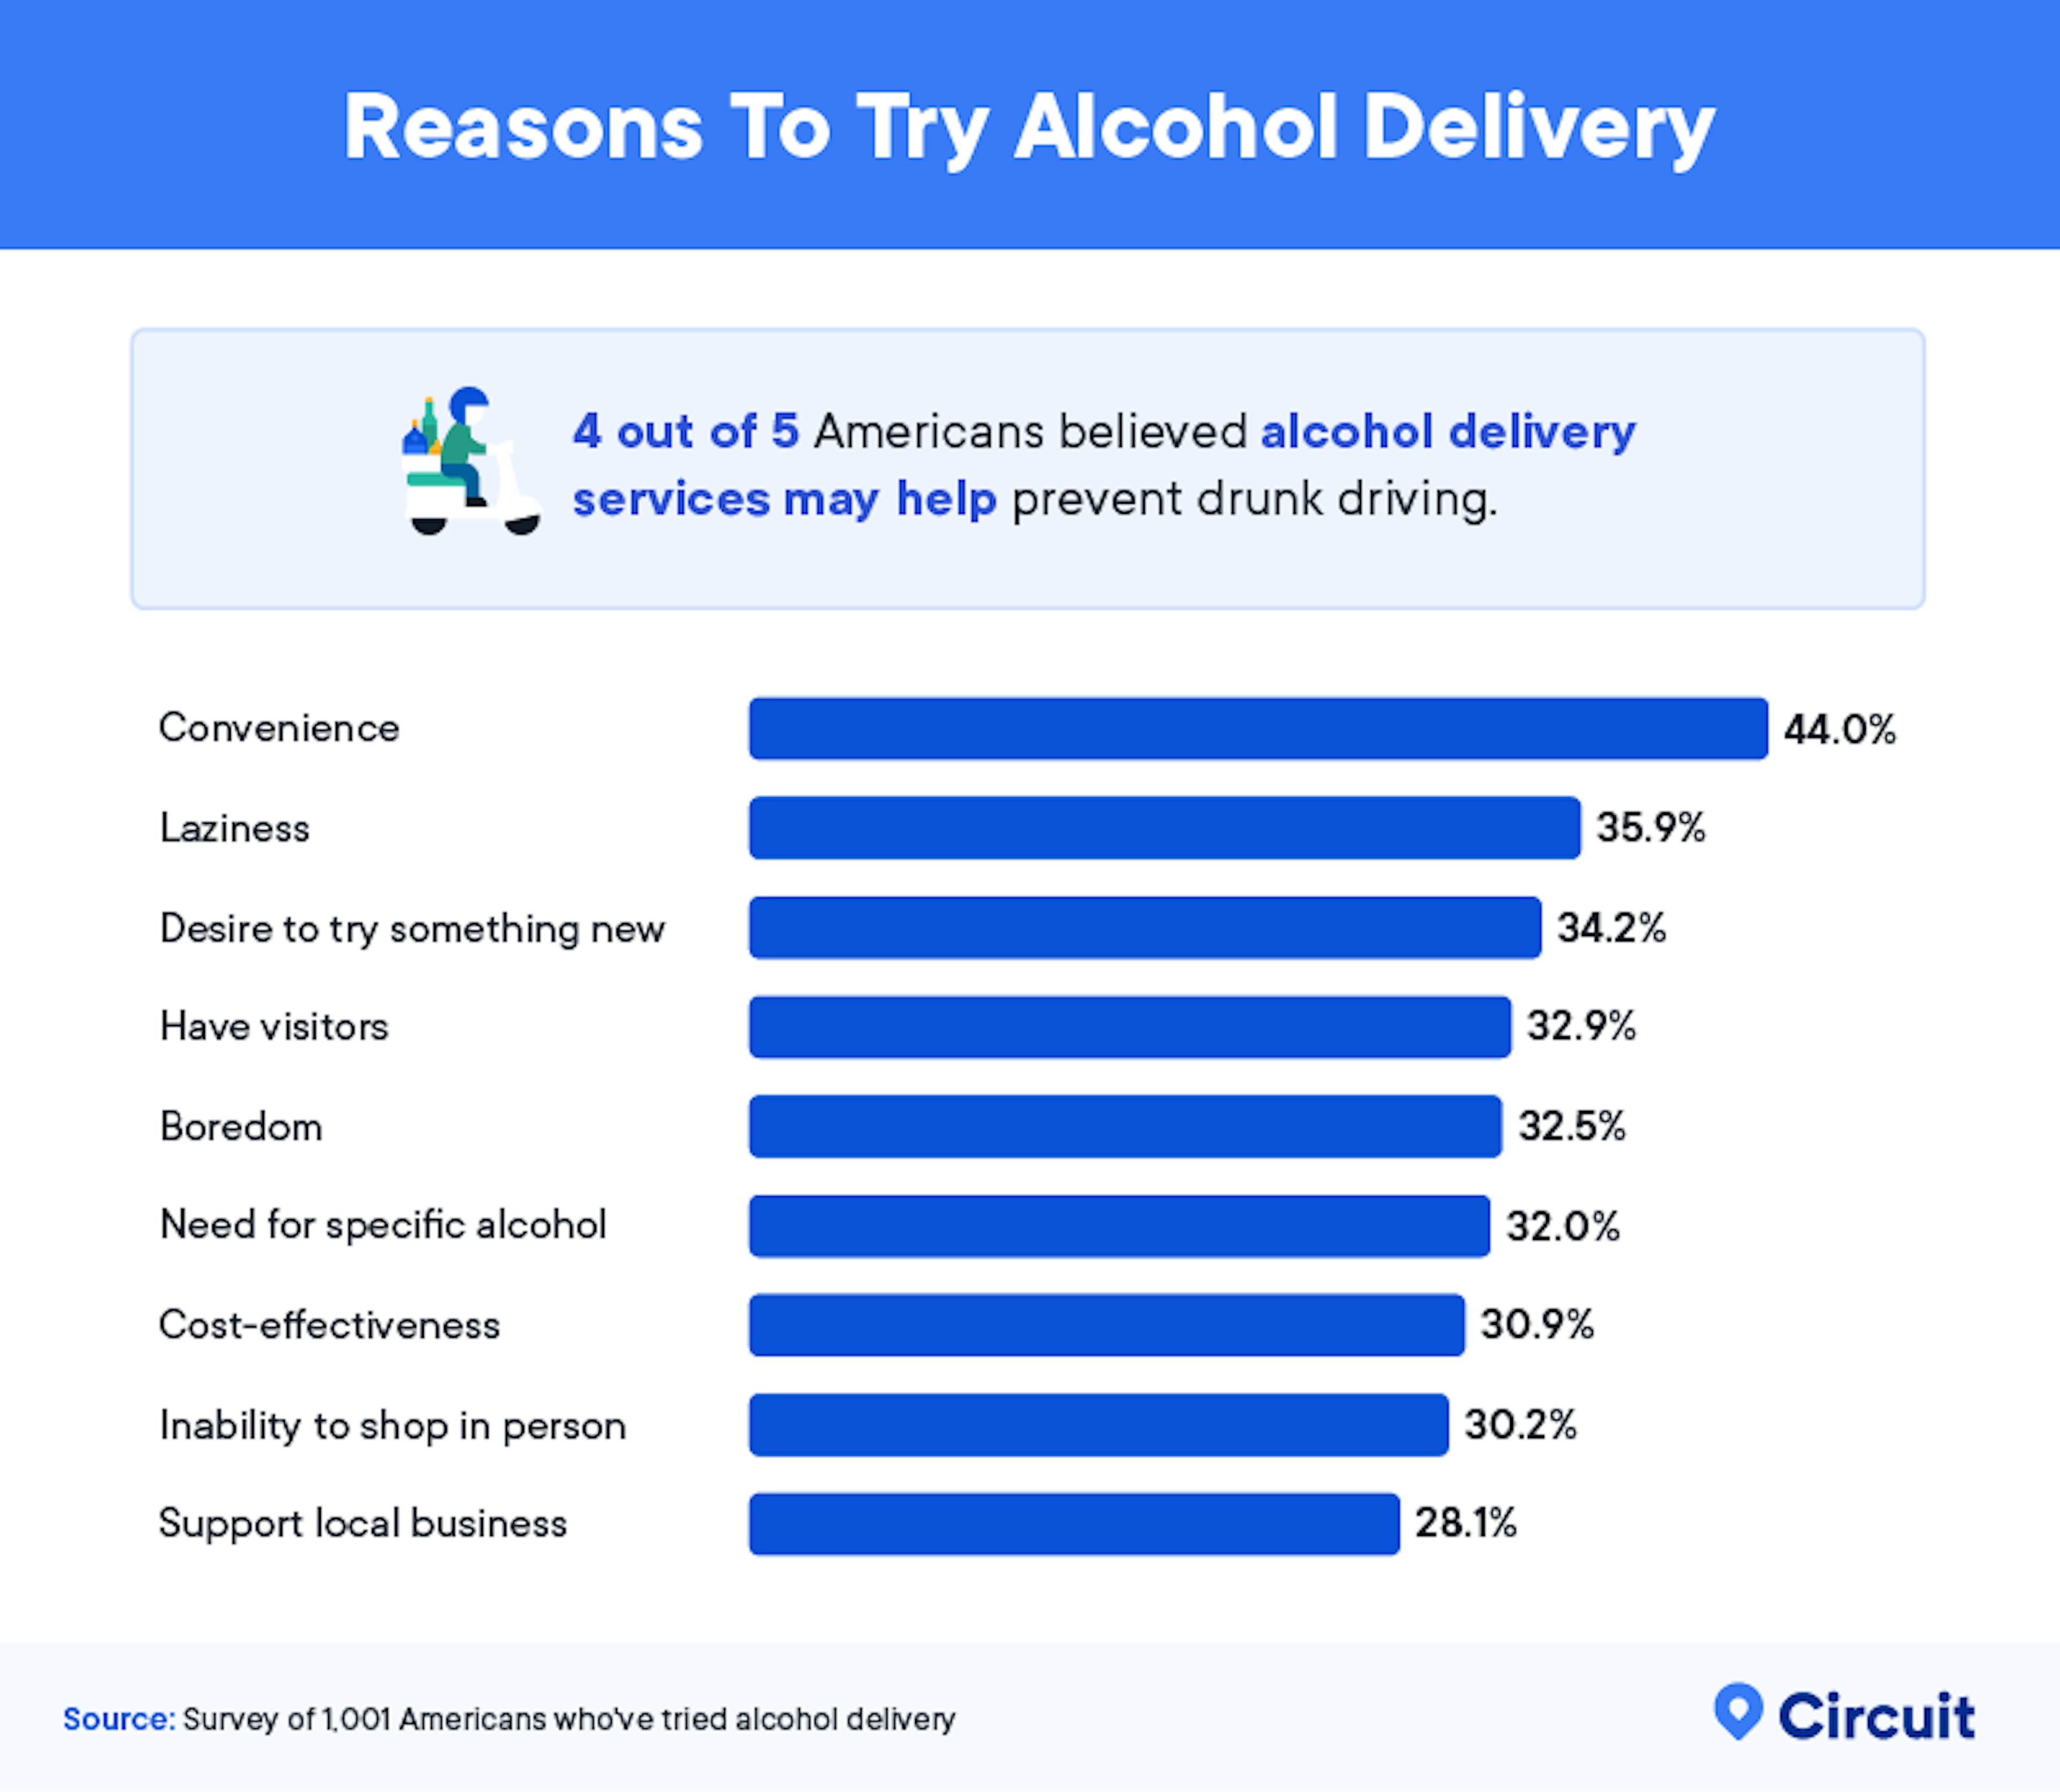 Reasons to try alcohol delivery 